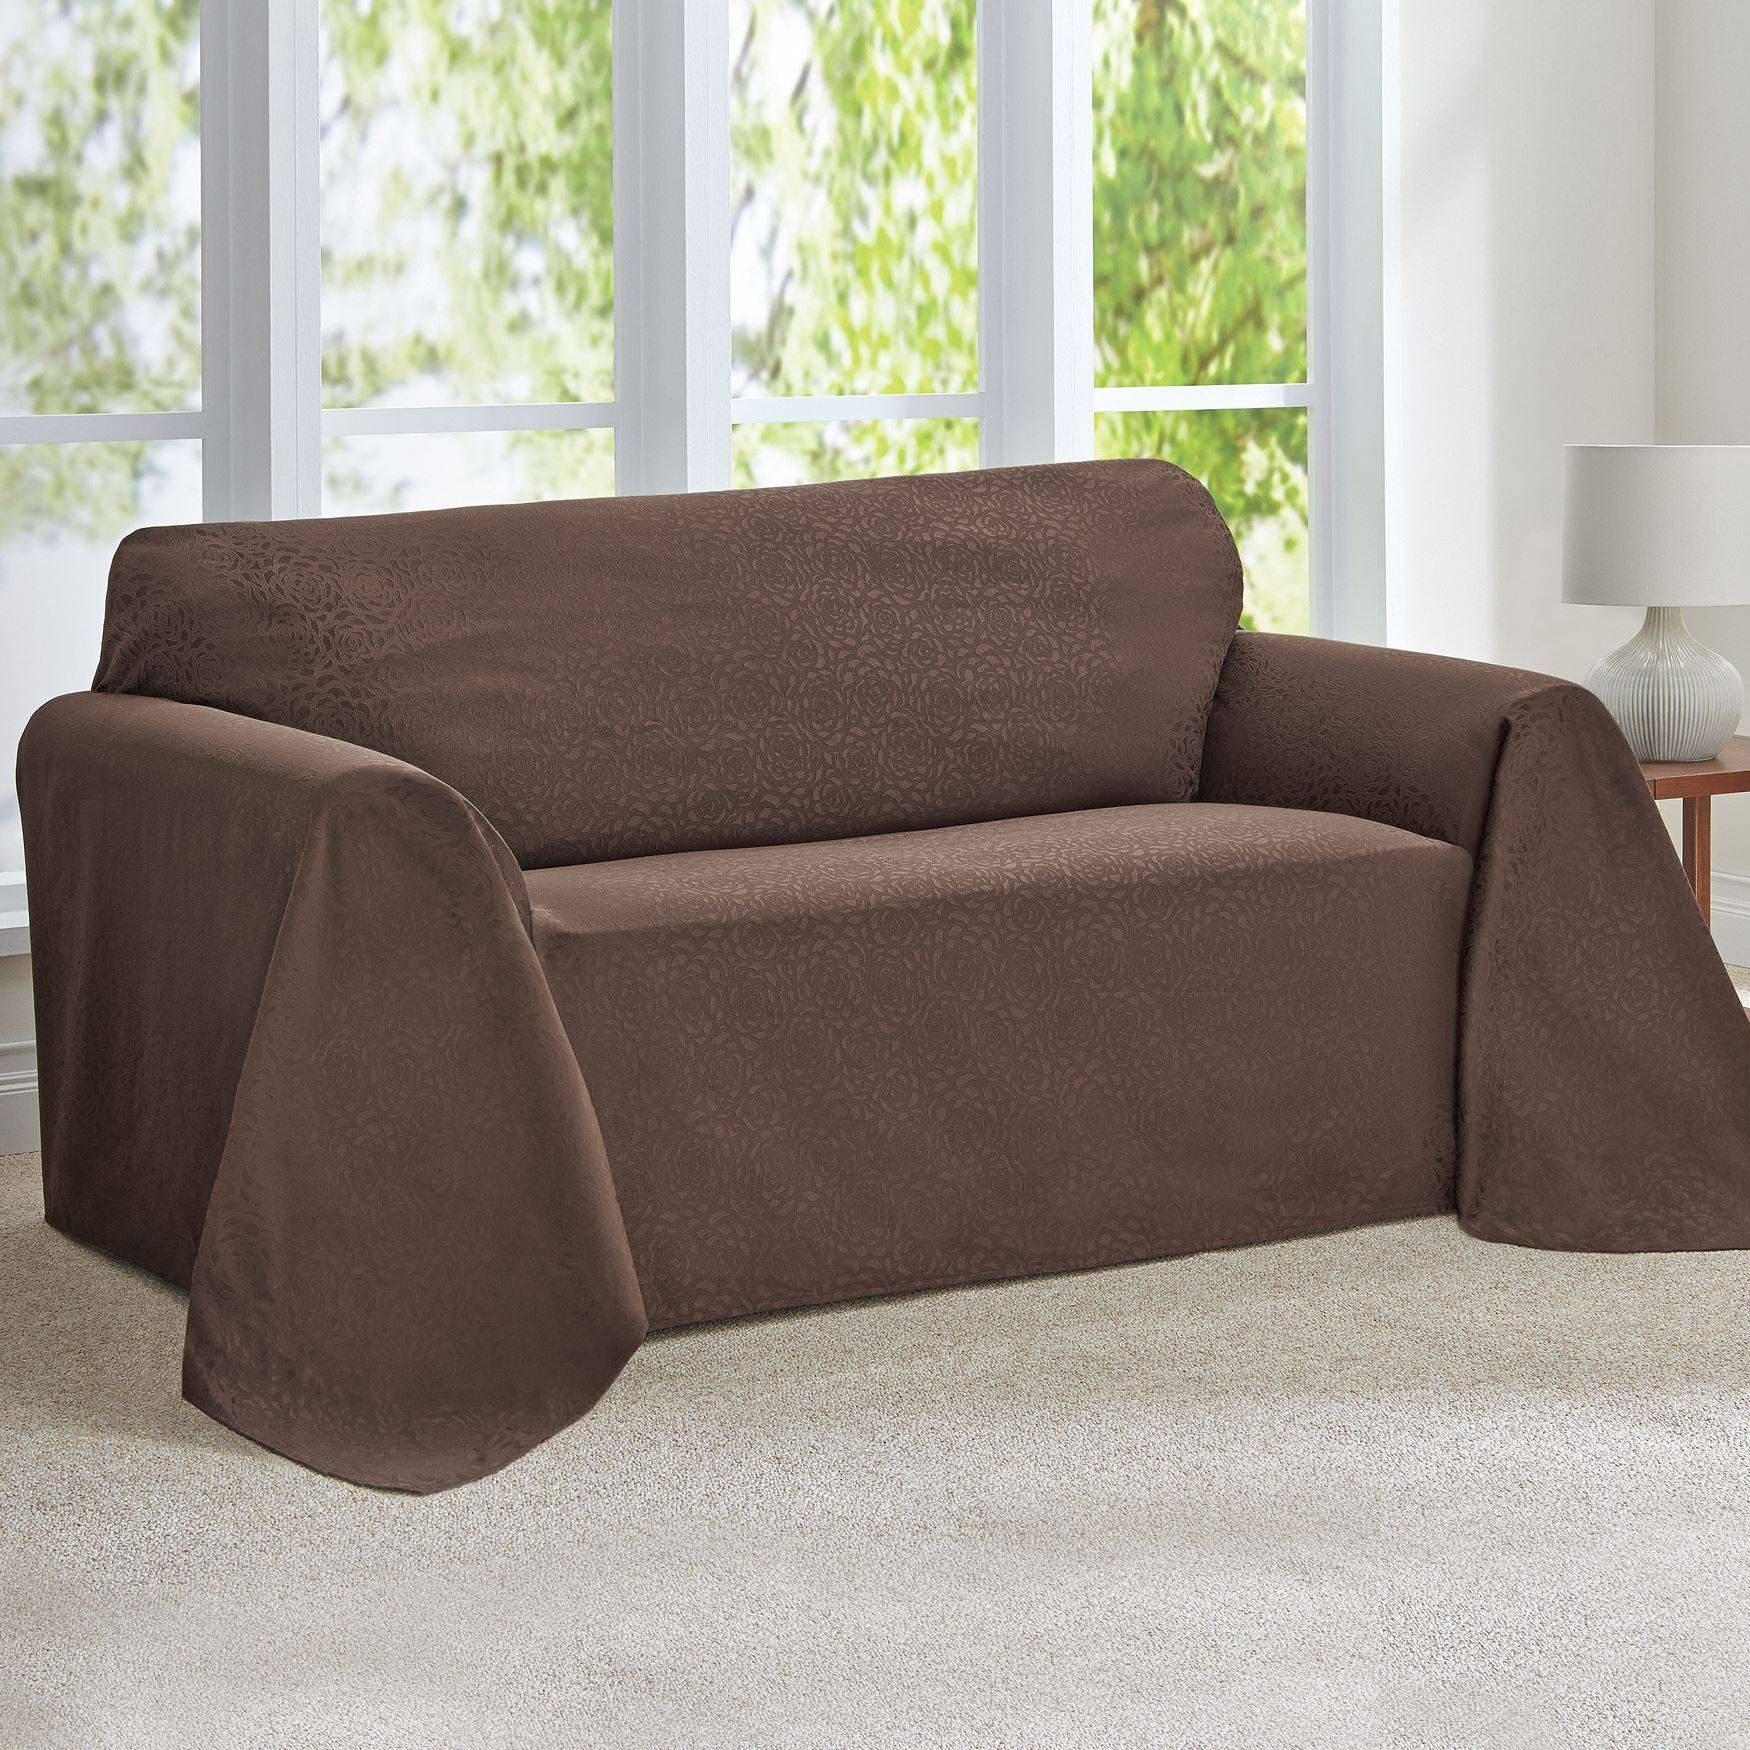 Furniture: Couch Covers At Walmart To Make Your Furniture Stylish For Walmart Slipcovers For Sofas (Photo 11 of 30)